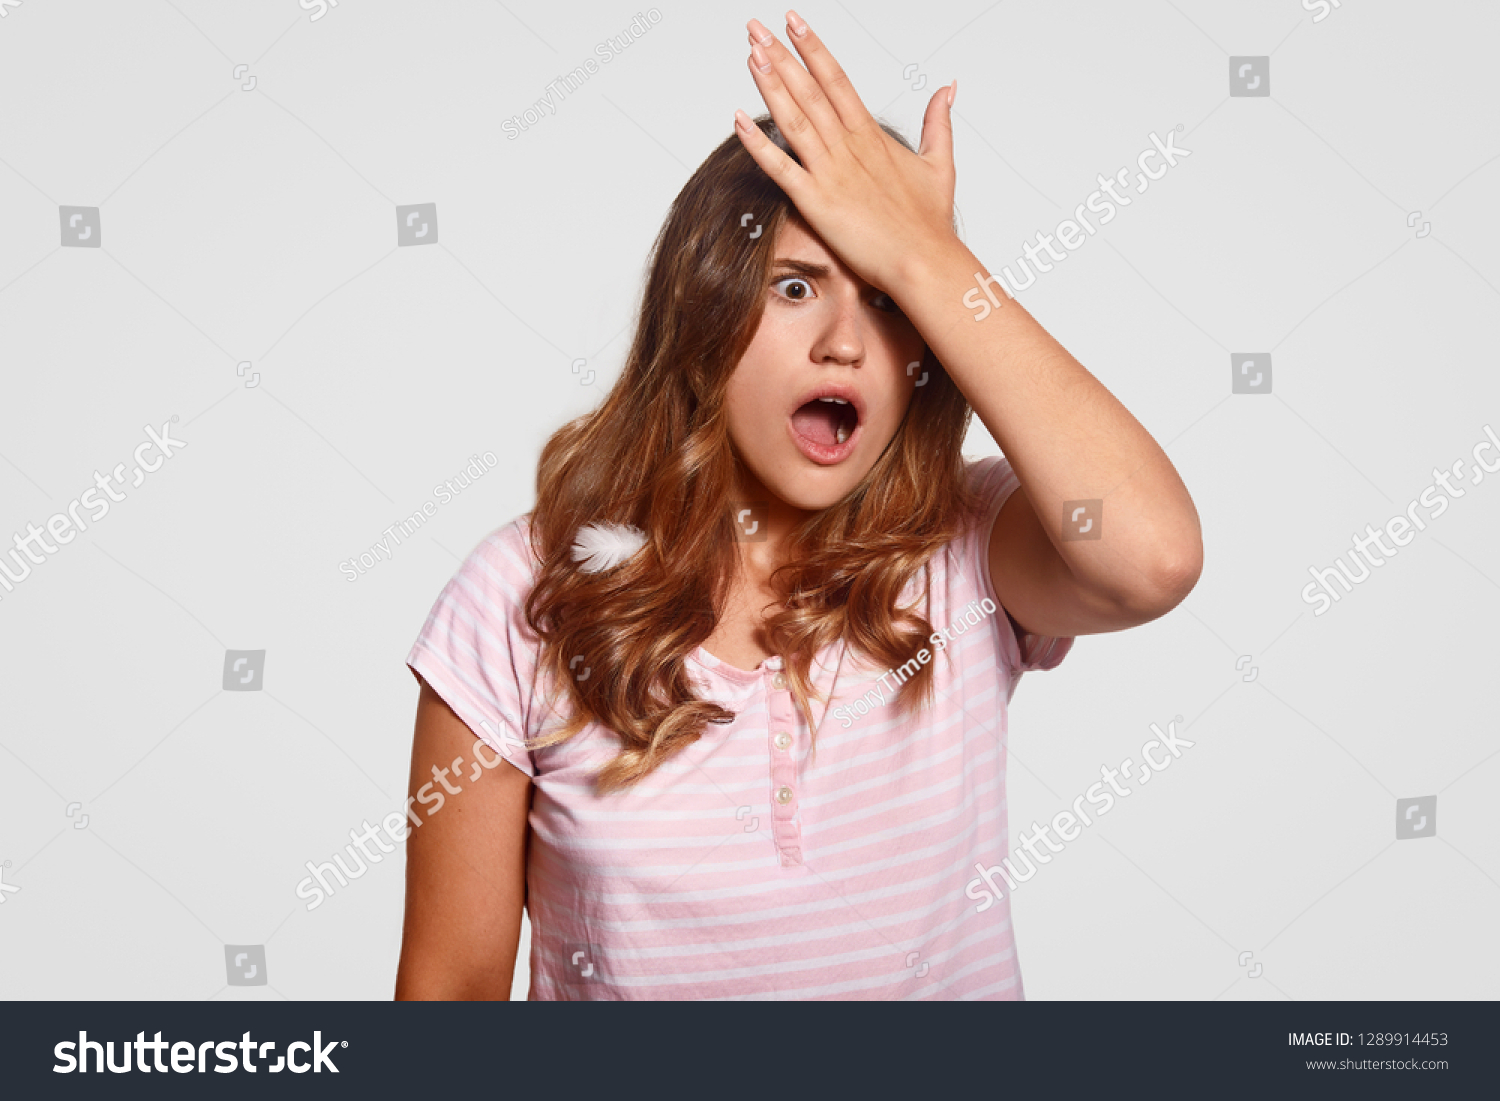 Frustrated shocked woman keeps palm on forehead, forgets about work, wakes up late, dressed in pyjamas, stands against white background, has surprised expression, feathers on hair. Omg concept #1289914453